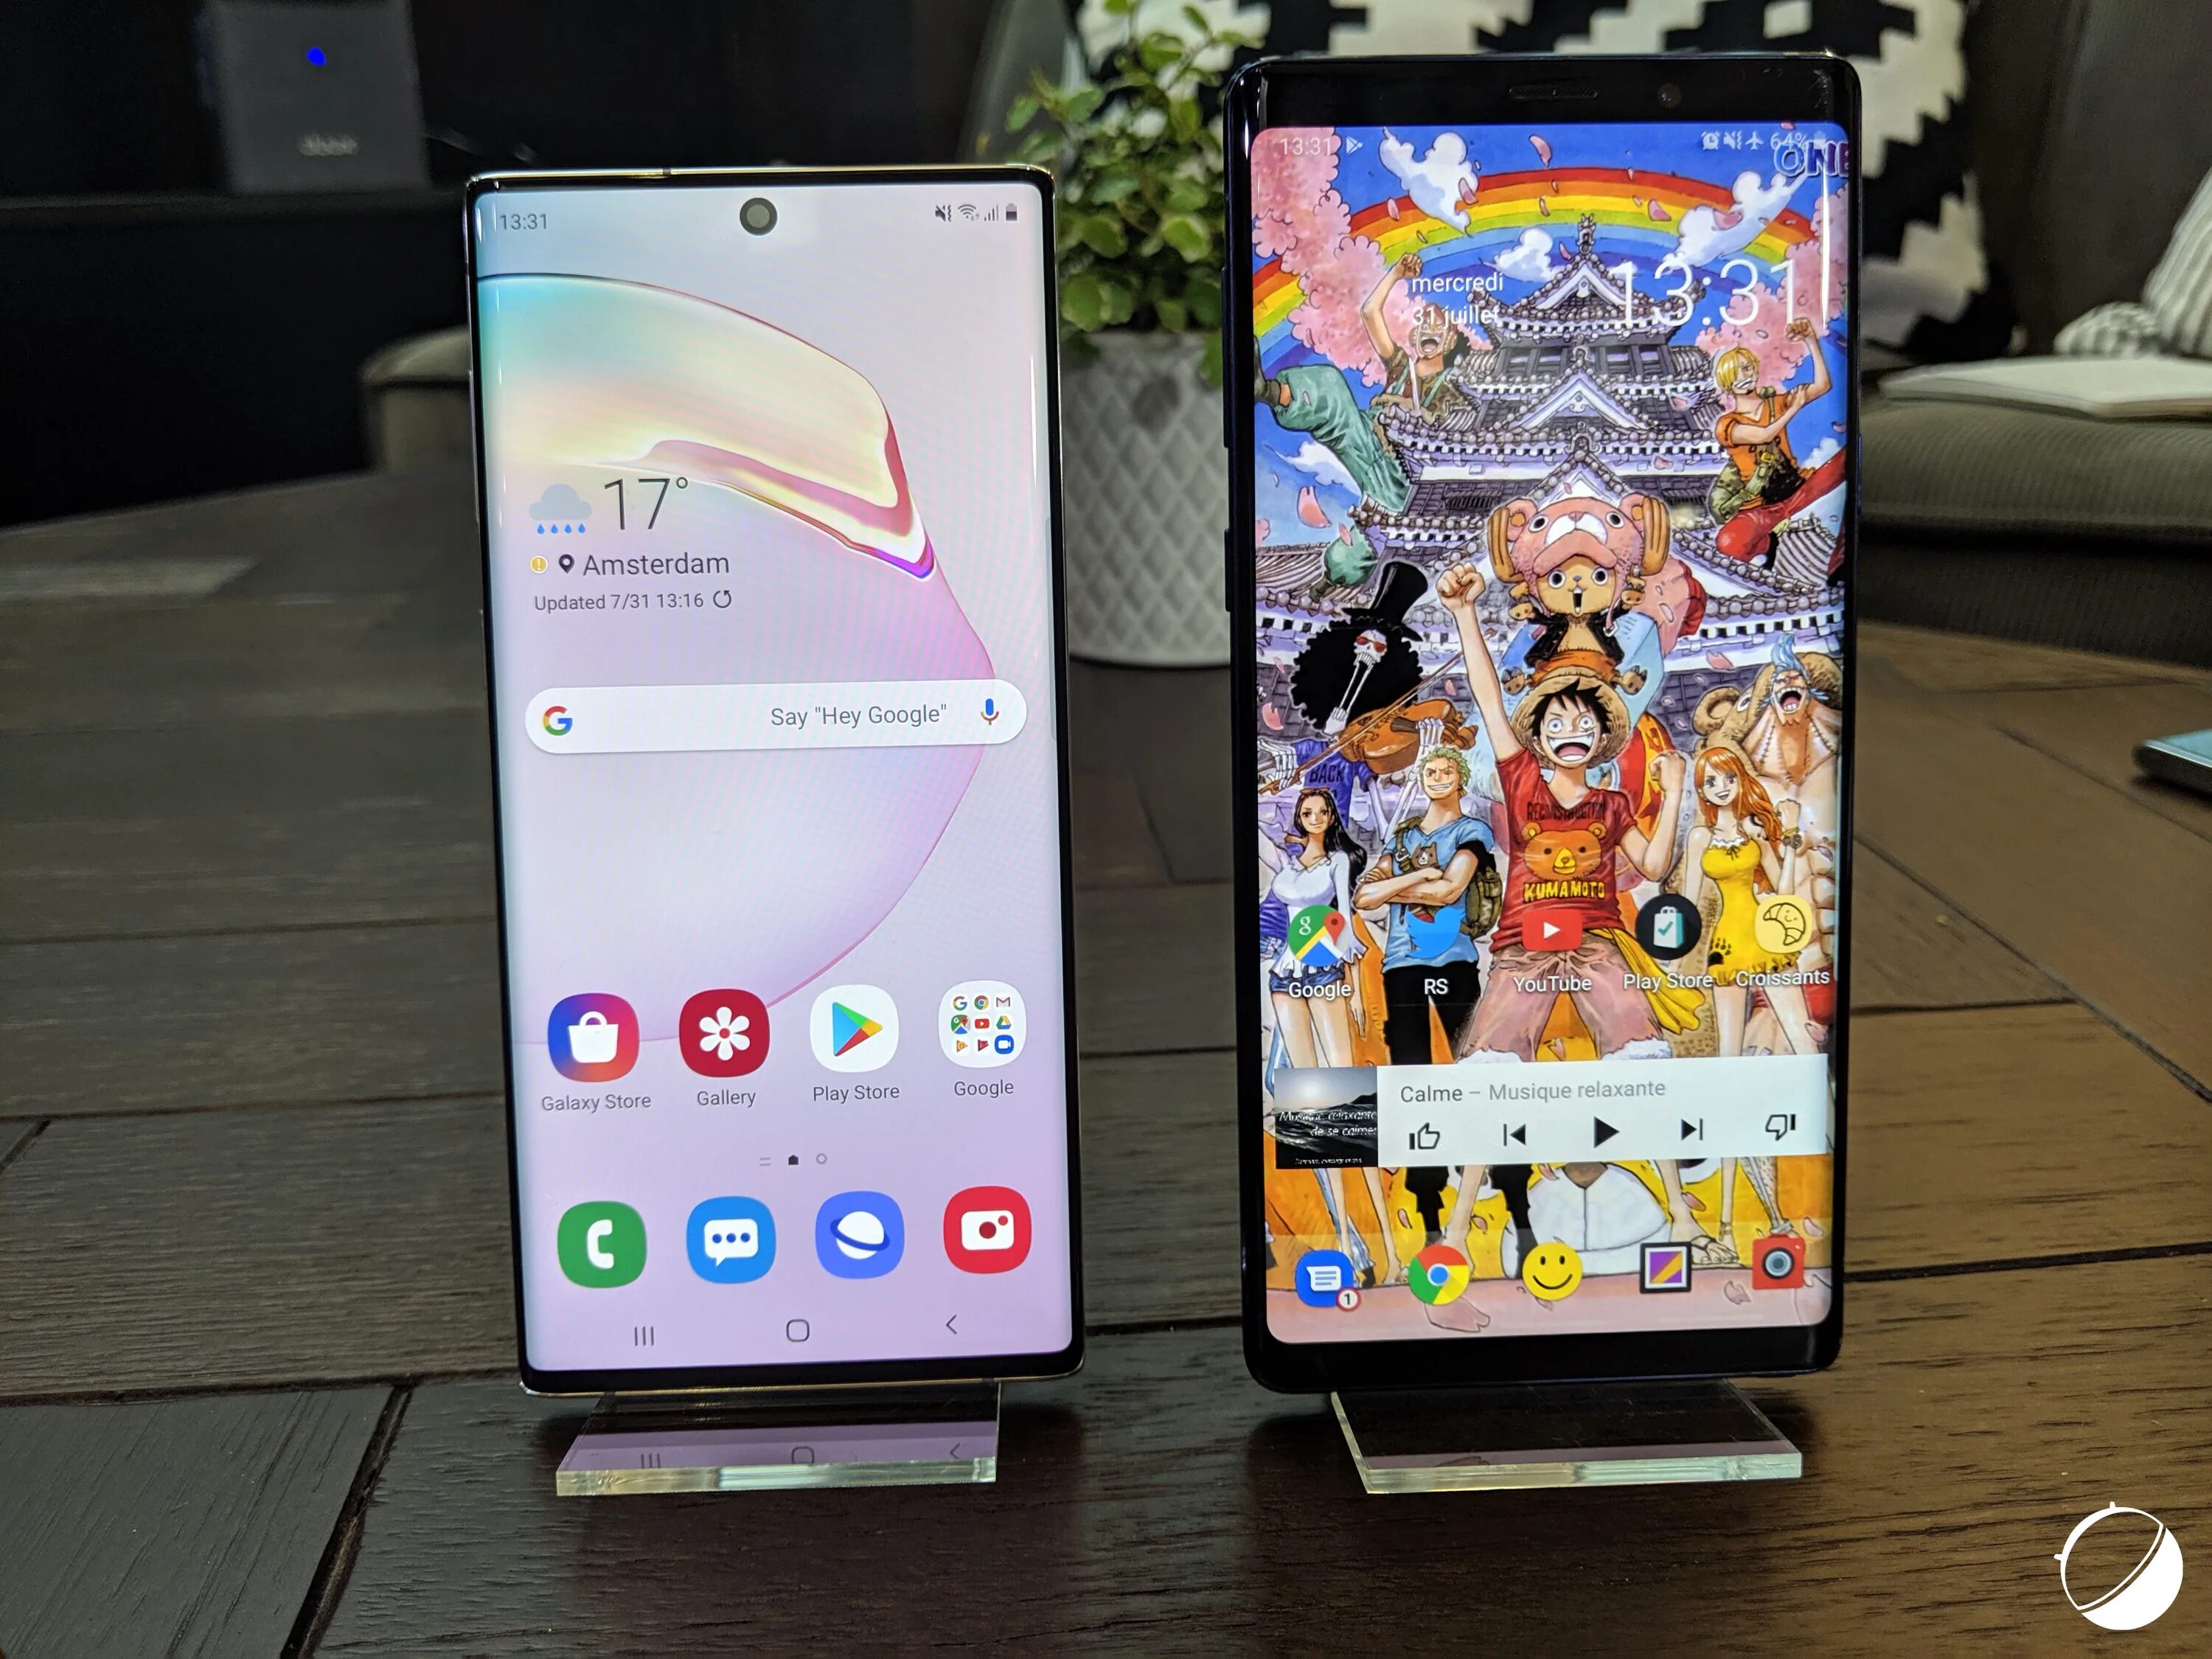 Samsung note 10 vs 10. Galaxy Note 10 vs Note 9. Самсунг гелакси ноут 10+. Galaxy Note 10 Plus. Note 10 Plus 5g.